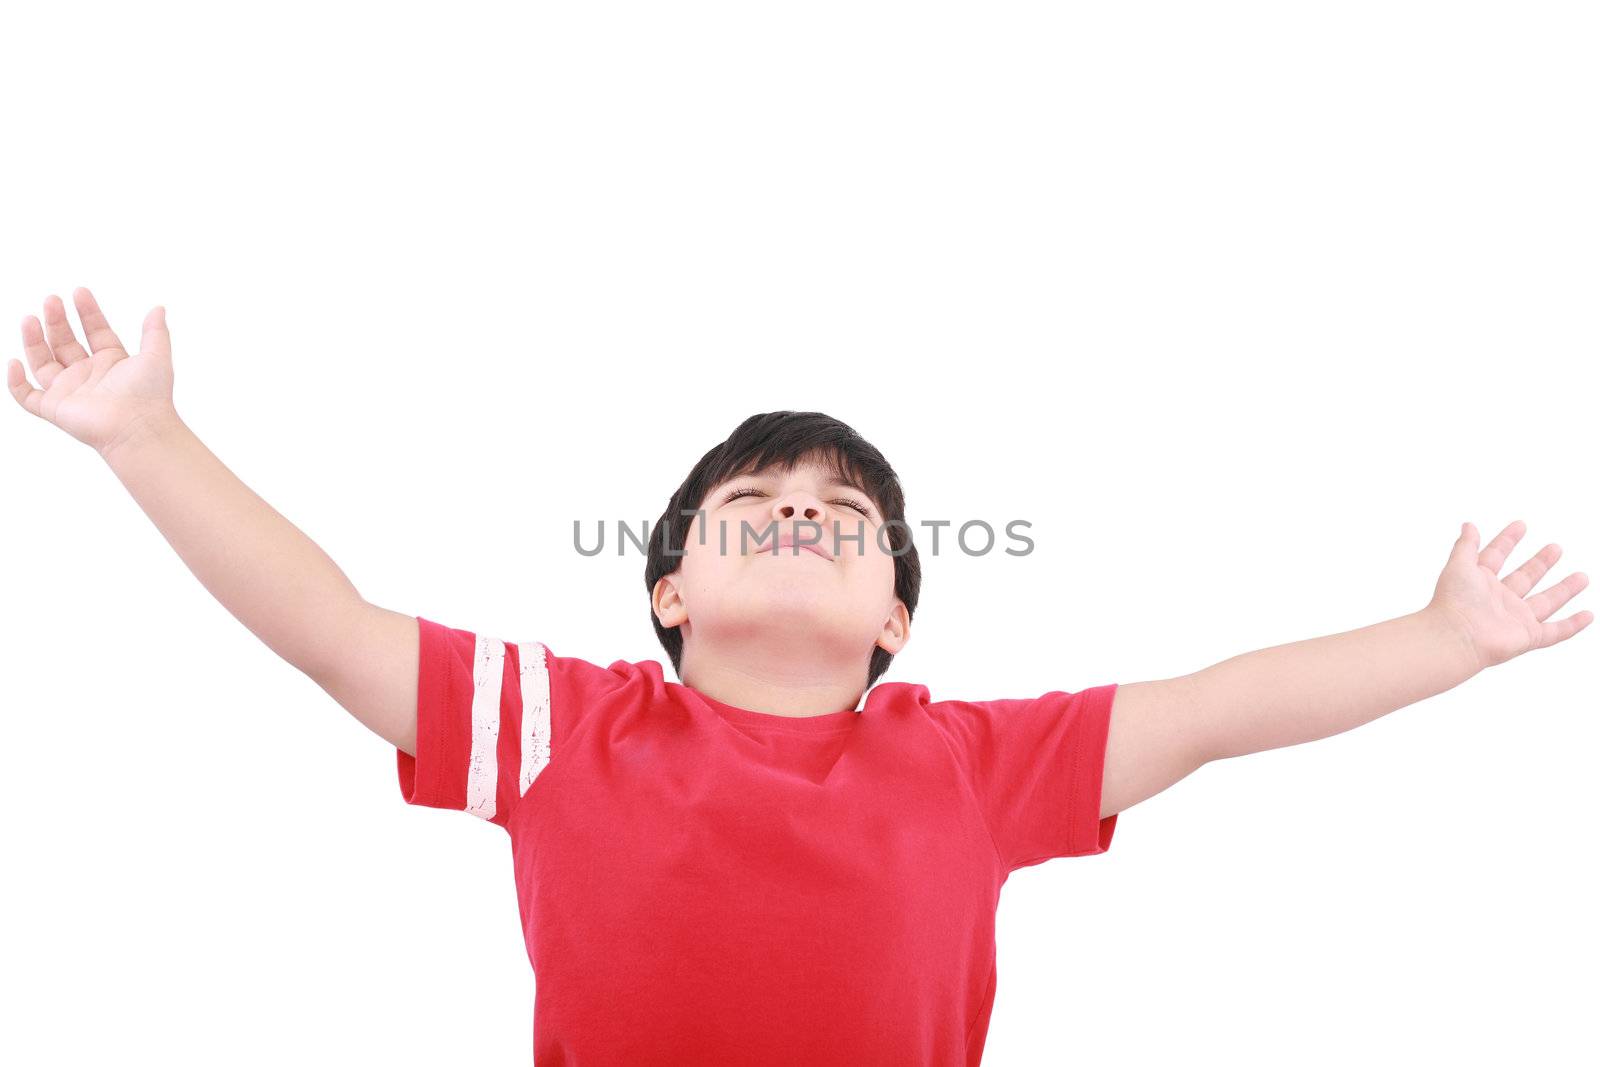 Portrait of the young boy holding hands up